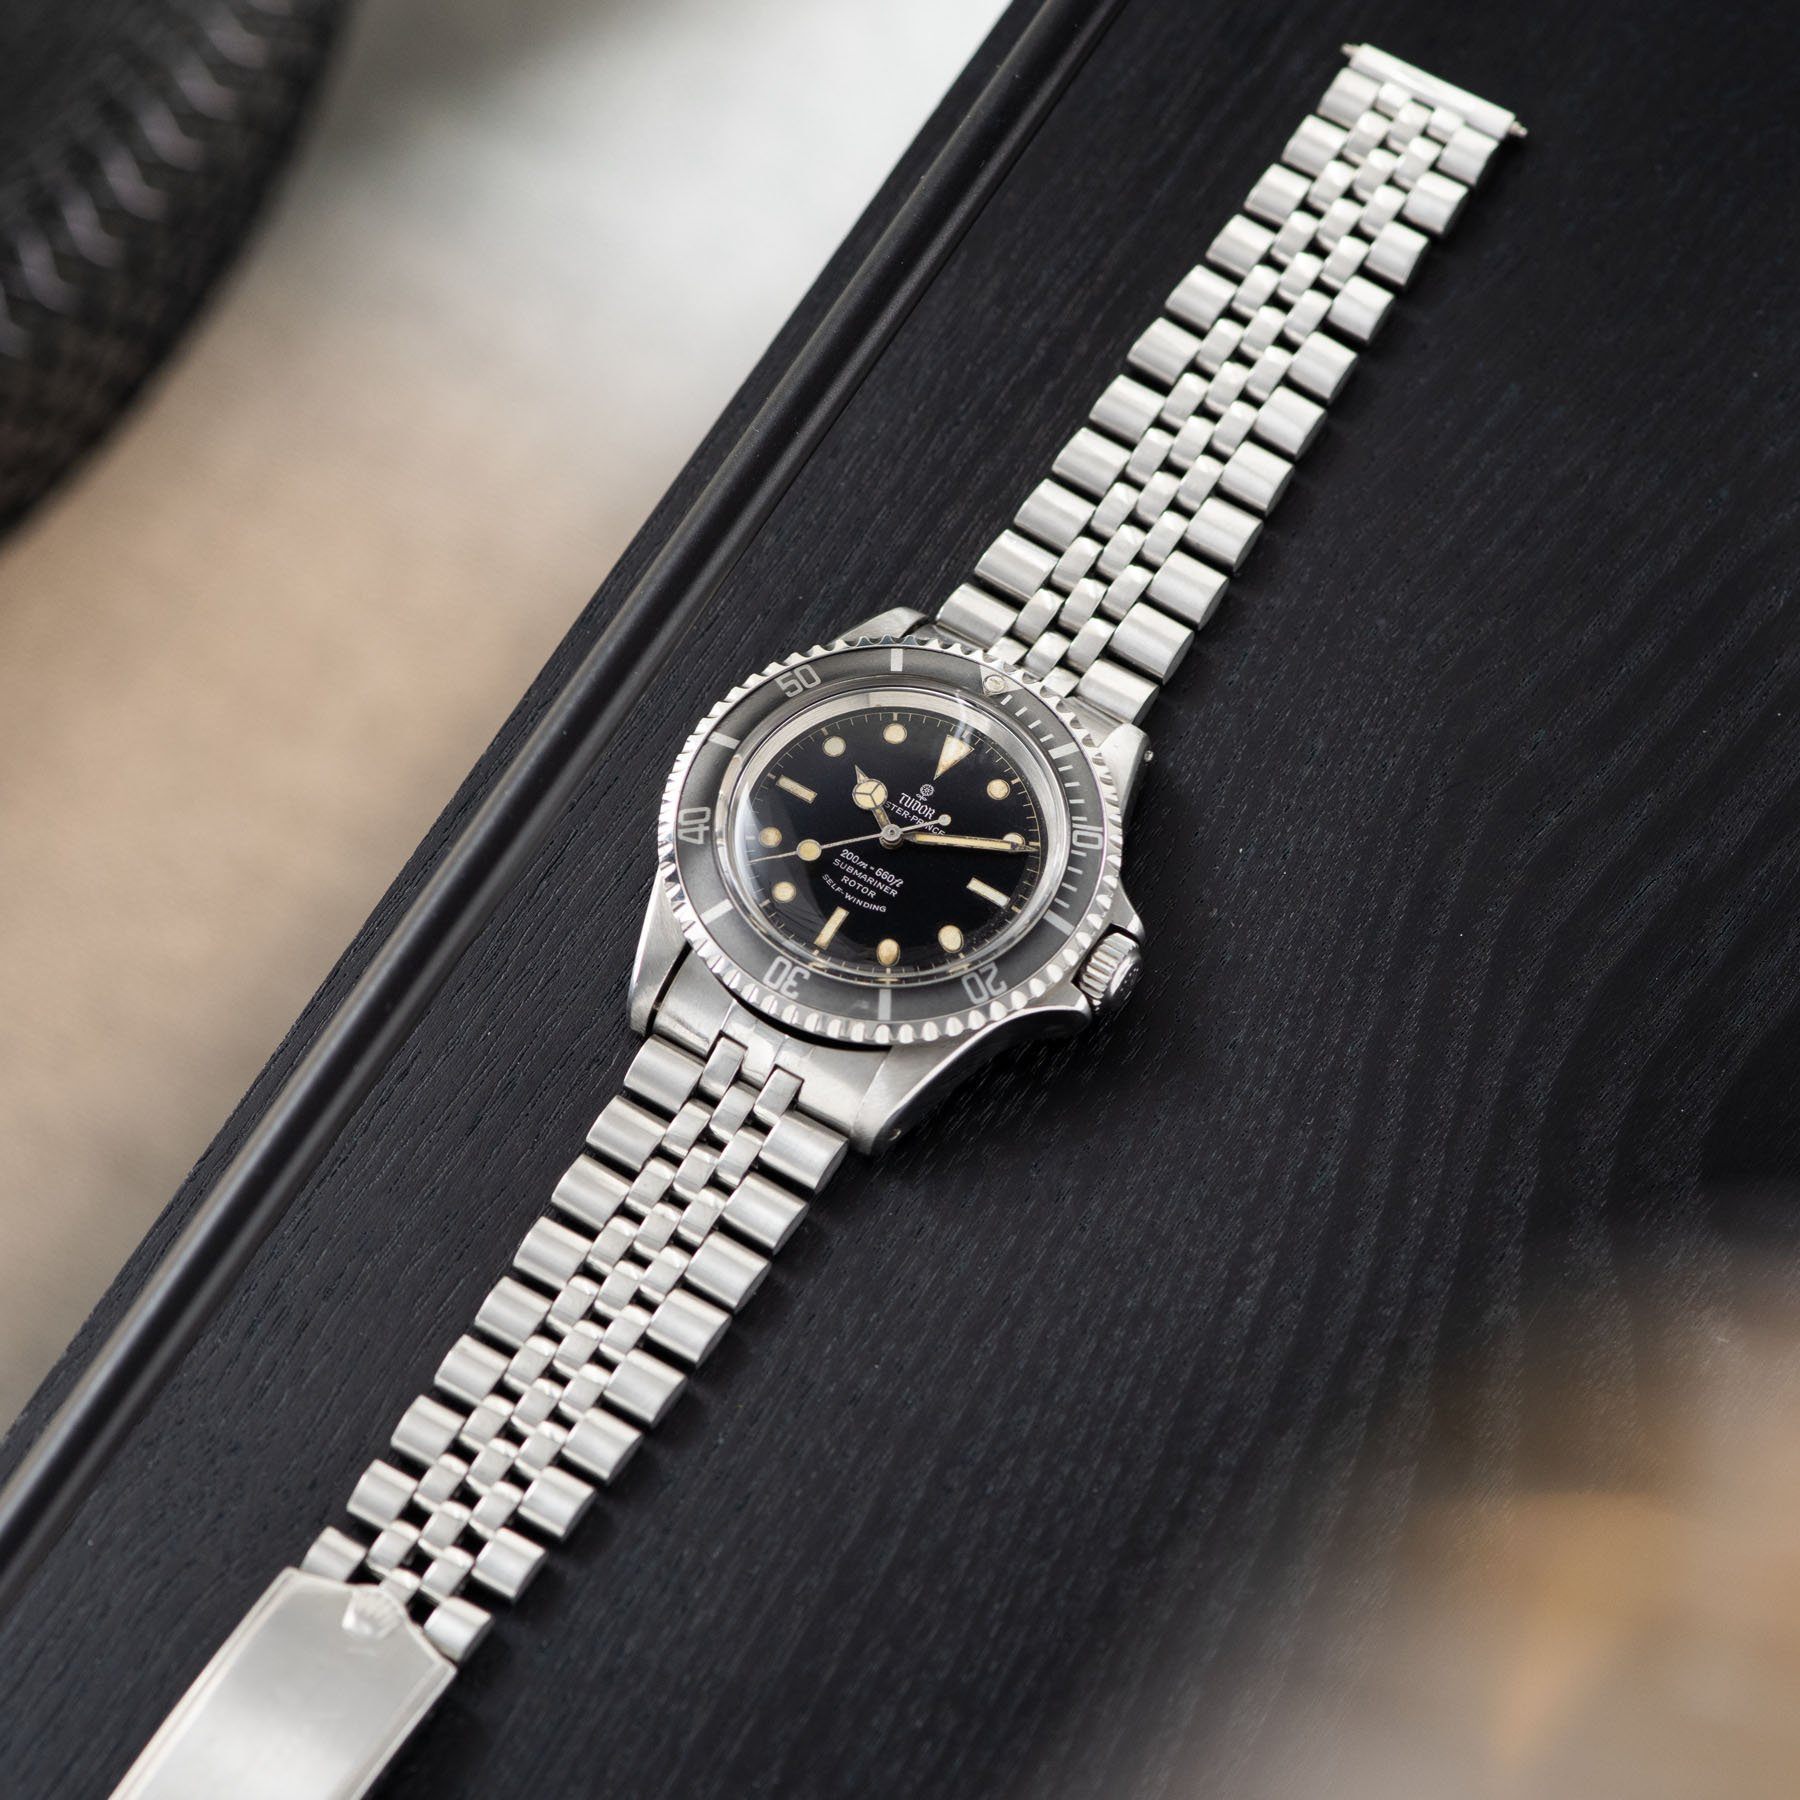 Tudor Submariner Ref 7928 Gilt Minute Track Ghost Bezel  fitted with a Mexican ‘Joskes’ jubilee bracelet